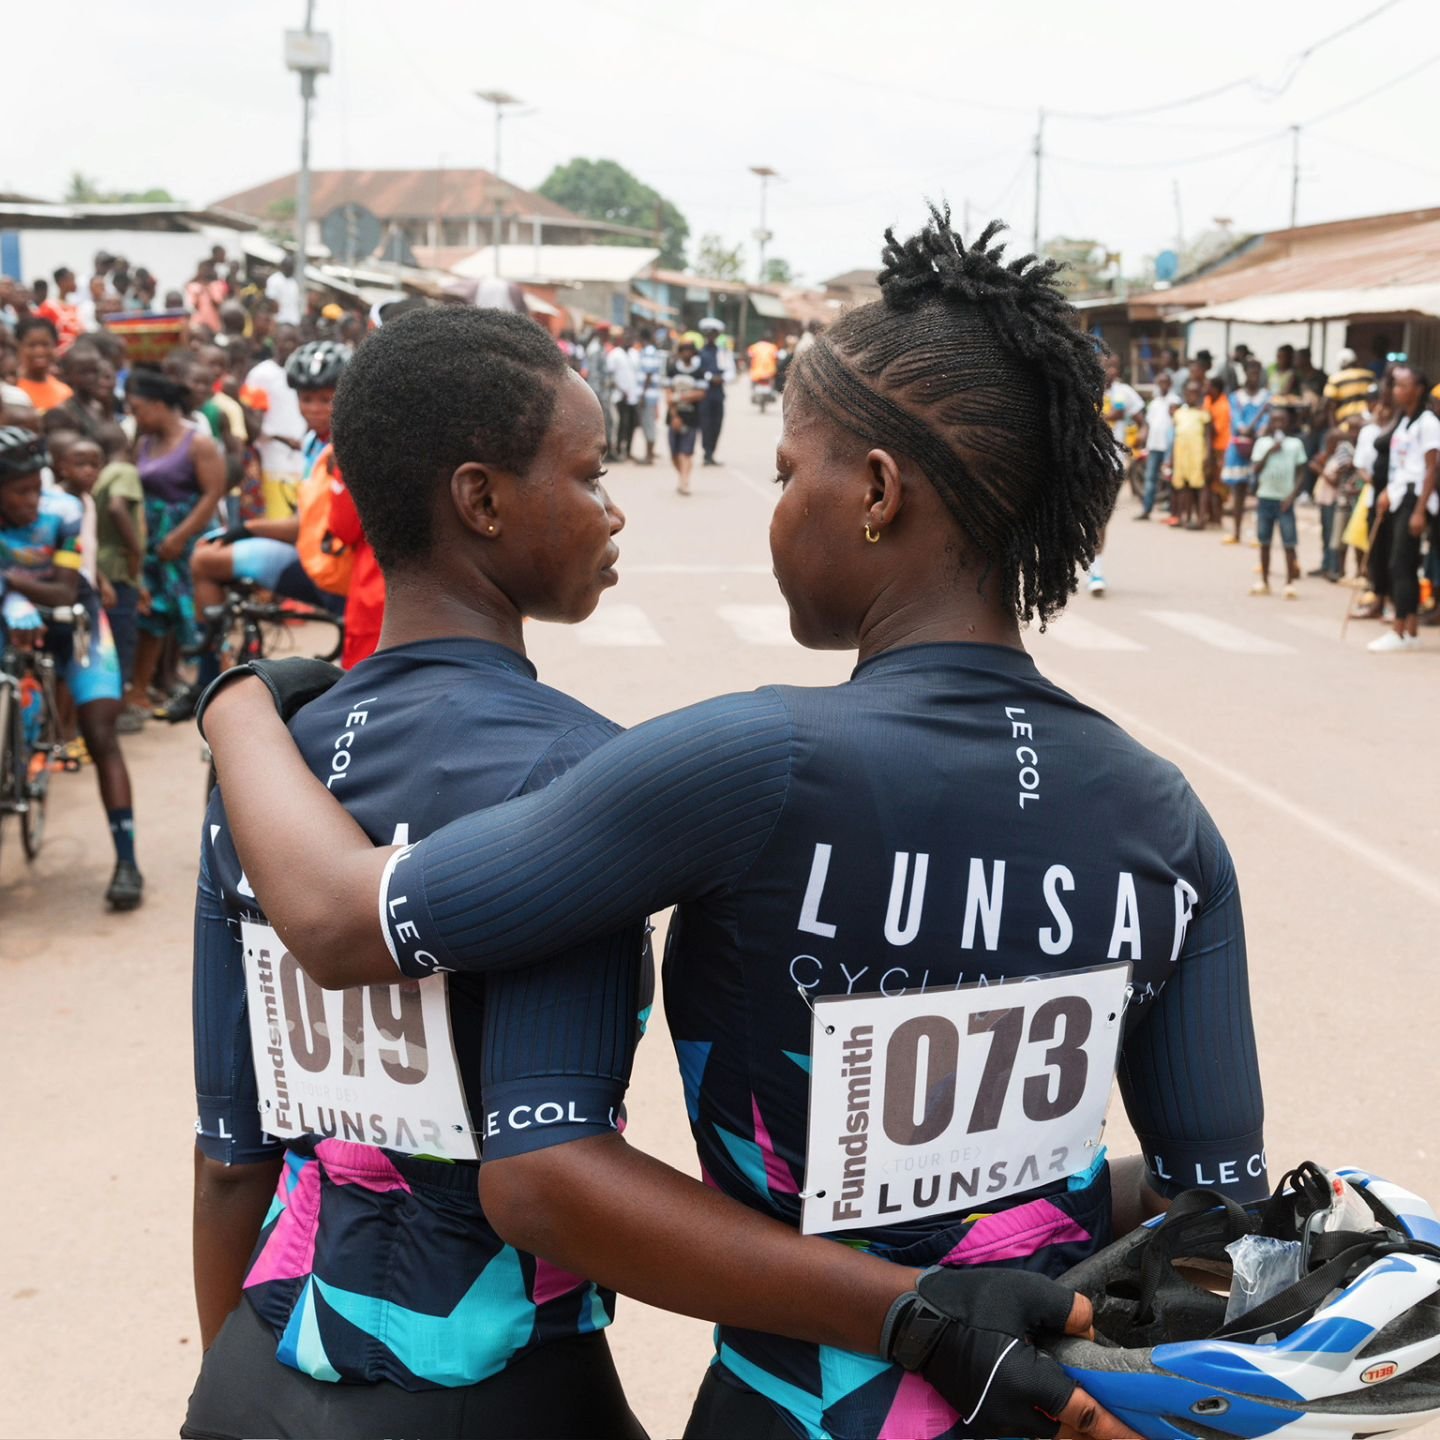 🇸🇱📸 Photo of the day p/b @gozwift 📸🇸🇱

Today felt like a new beginning in west African women's cycling. Huge respect to all our athletes who raced, including Kadie and Yainkain pictured here sharing a moment after the finish. 

📸 @mattgrayson_